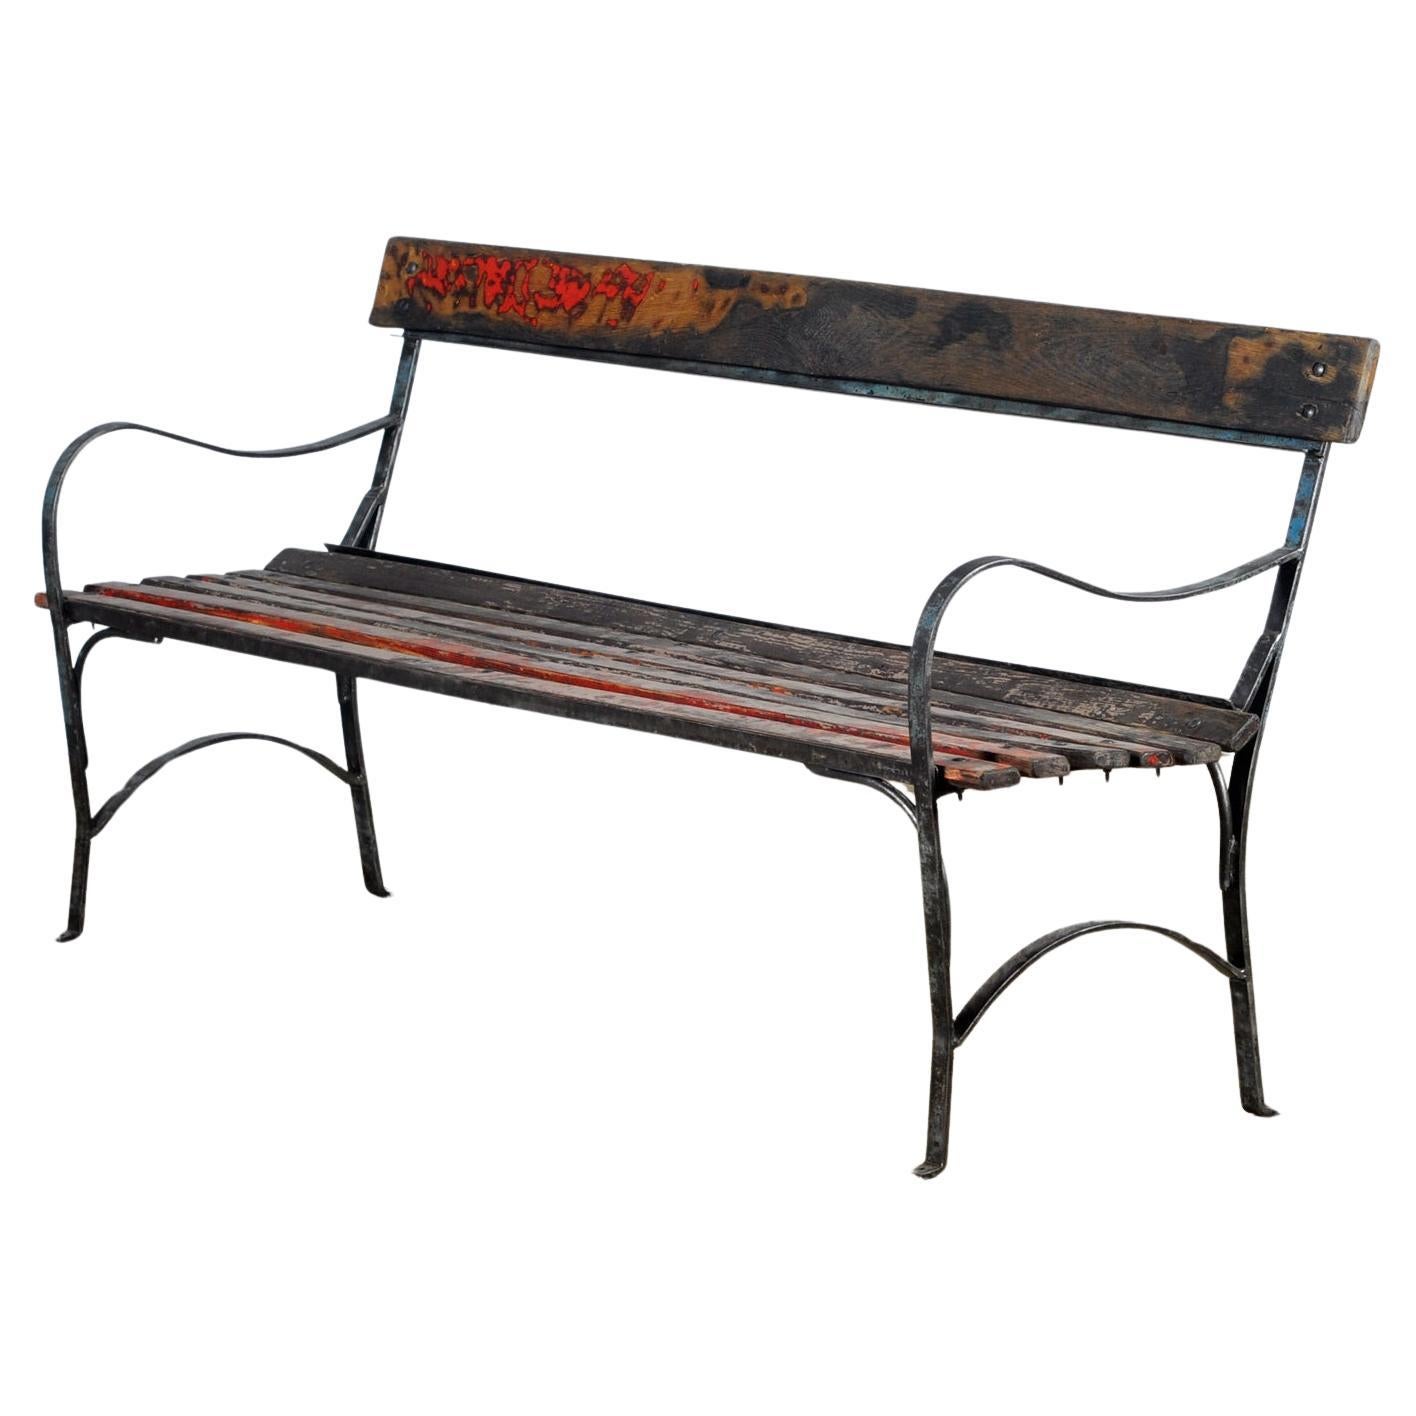 What are some types of benches?